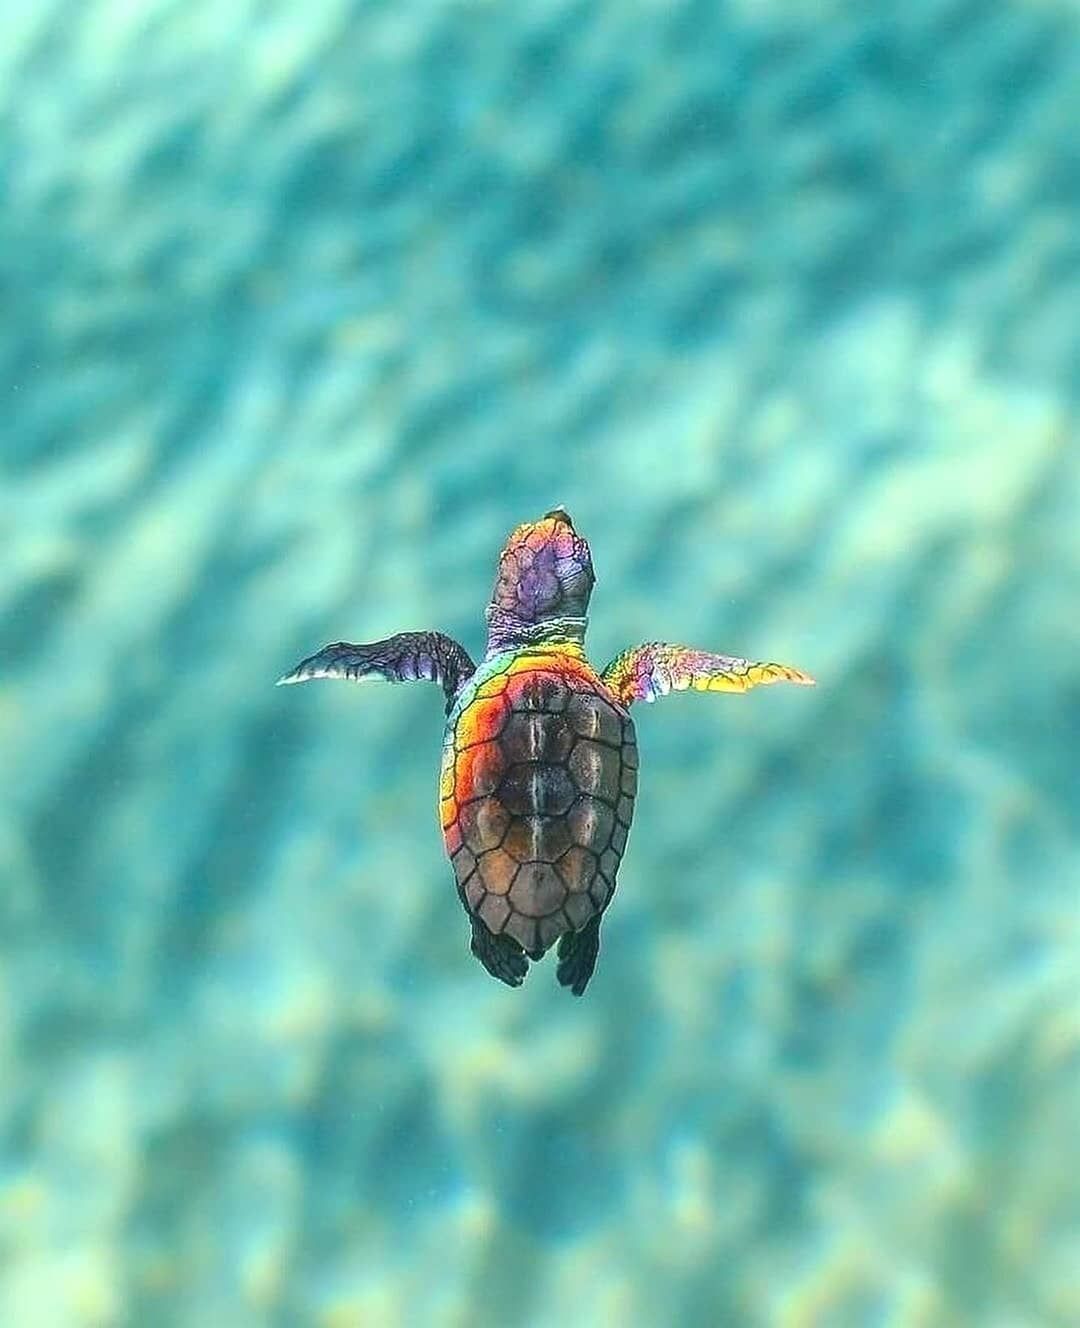 We_look_at_the_world on Instagram: “Magical sea turtles